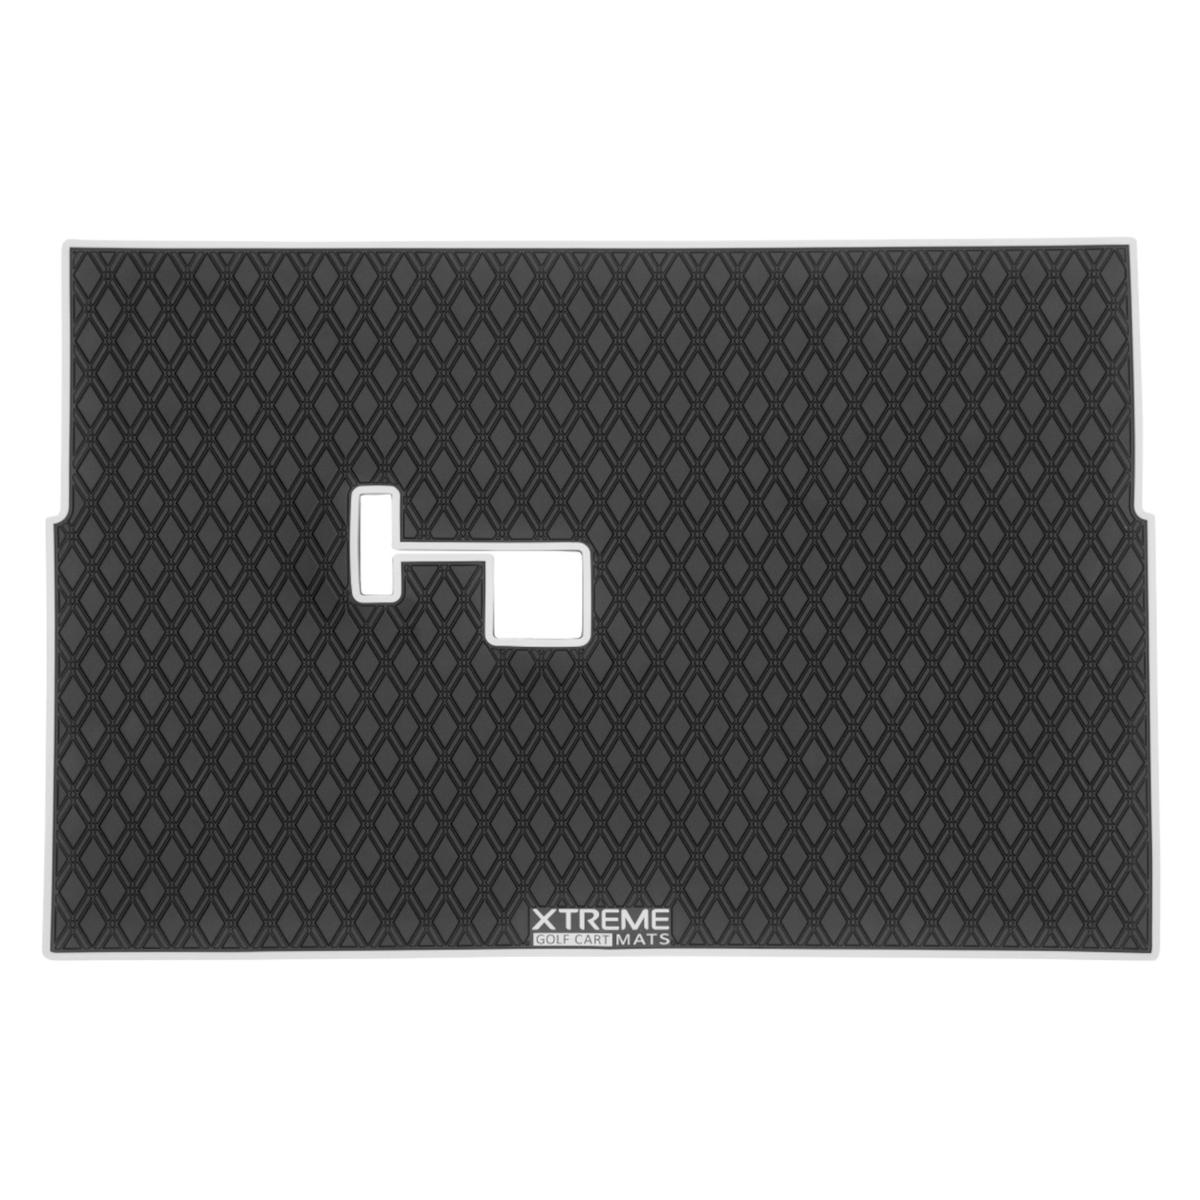 Xtreme Floor Mats for Club Car DS (82-13) / Villager (82-18) - Black/Grey